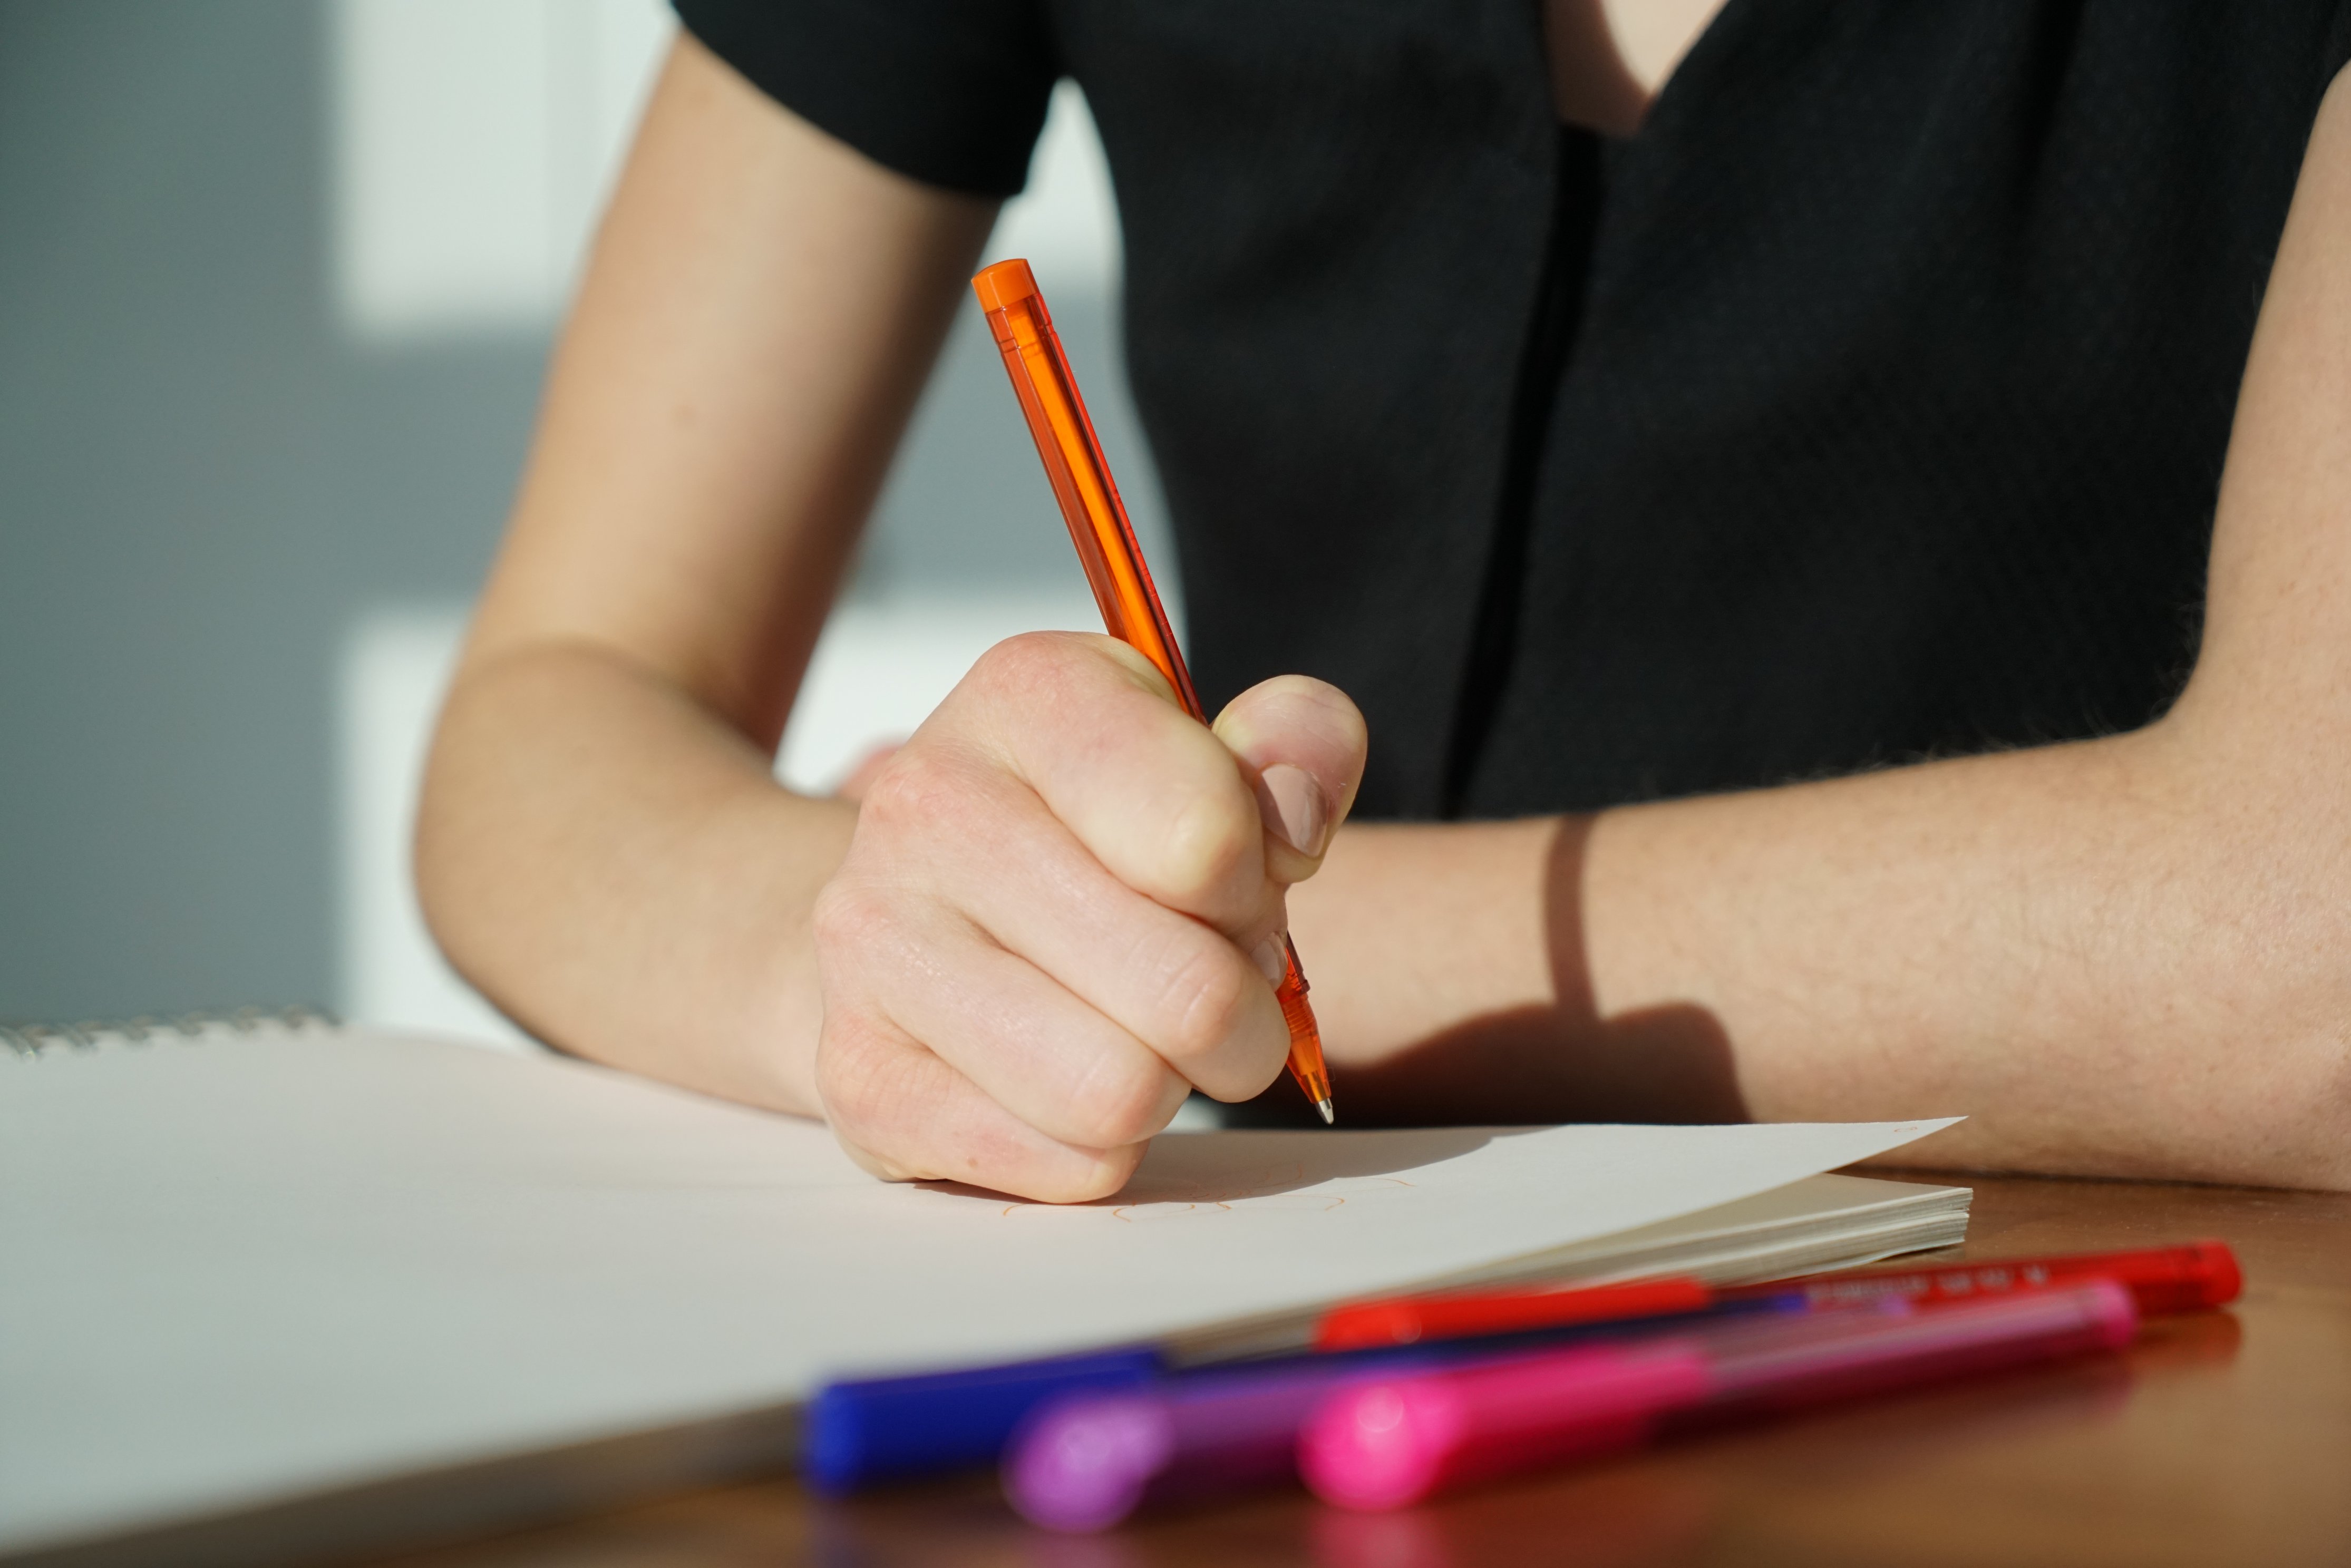 Woman writes a note with an orange pen - dishonesty in the classroom